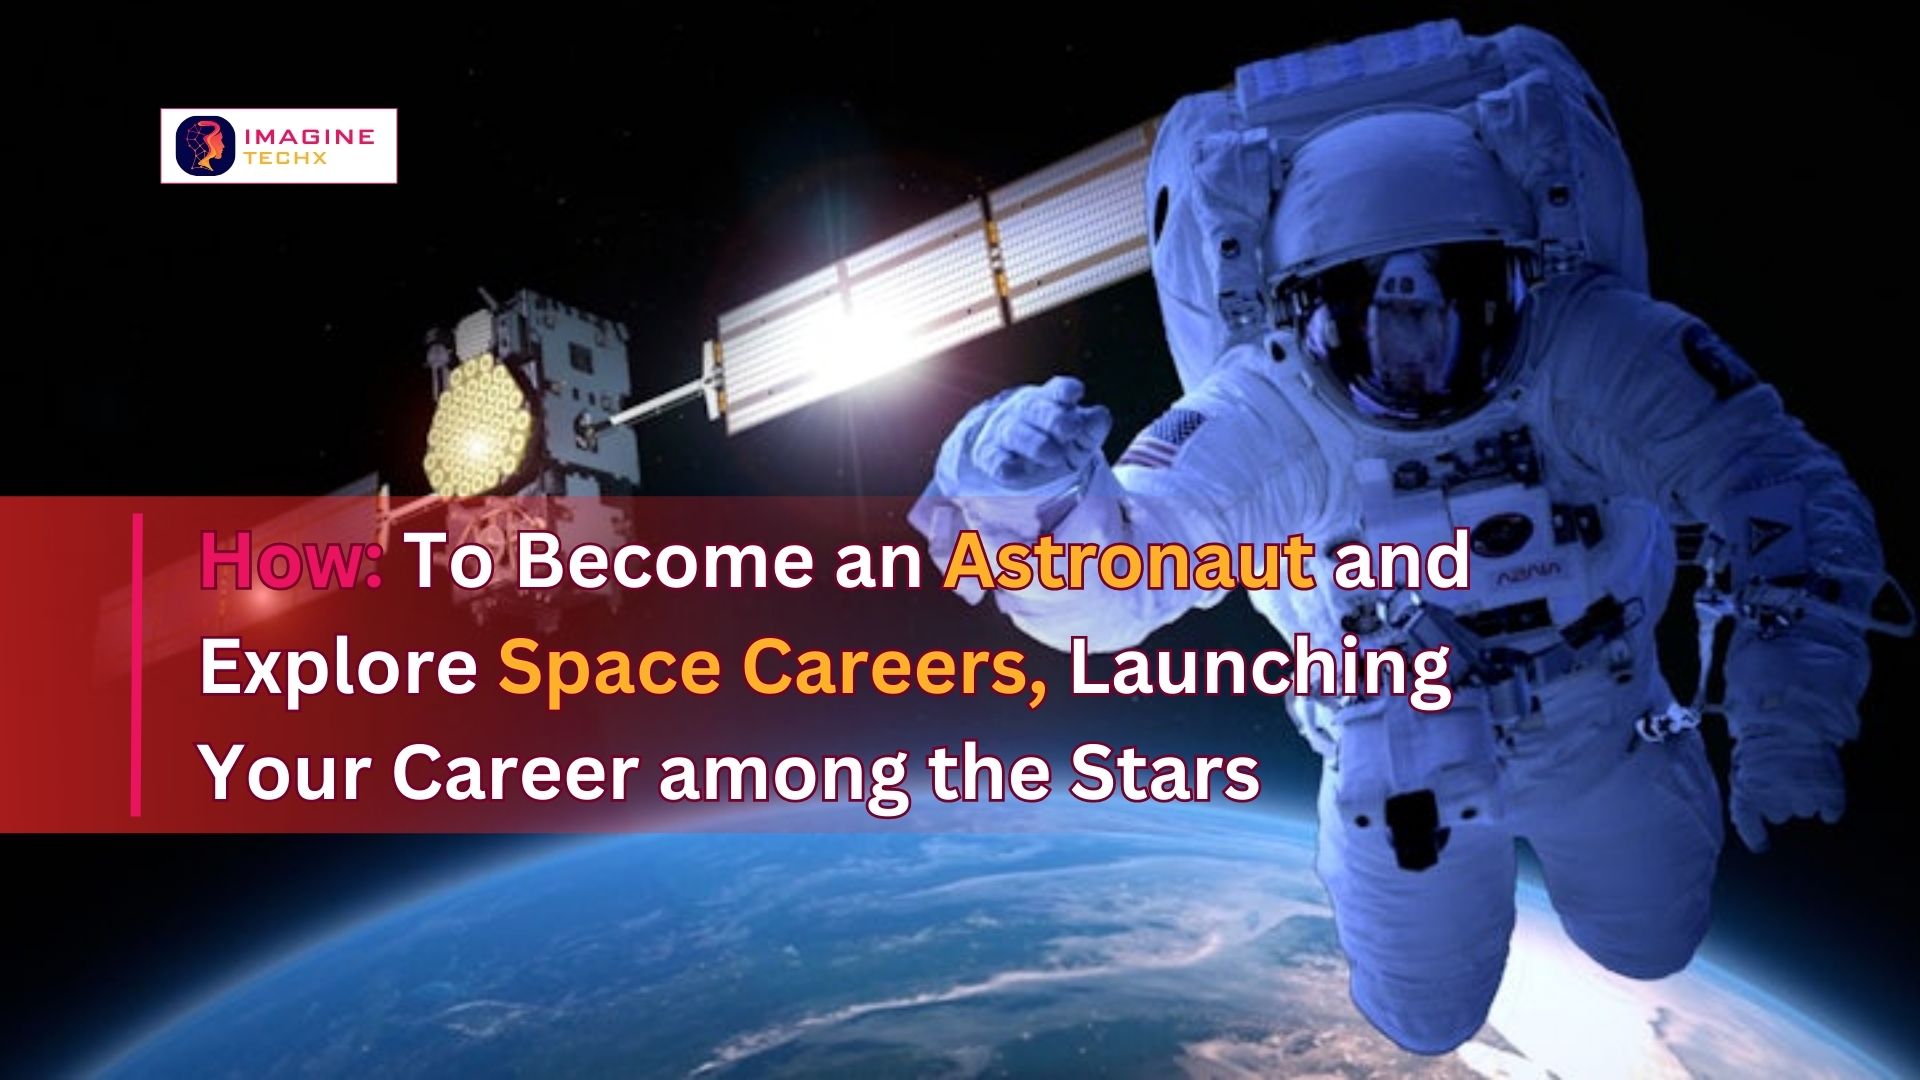 How: To Become an Astronaut and Explore Space Careers, Launching Your Career among the Stars